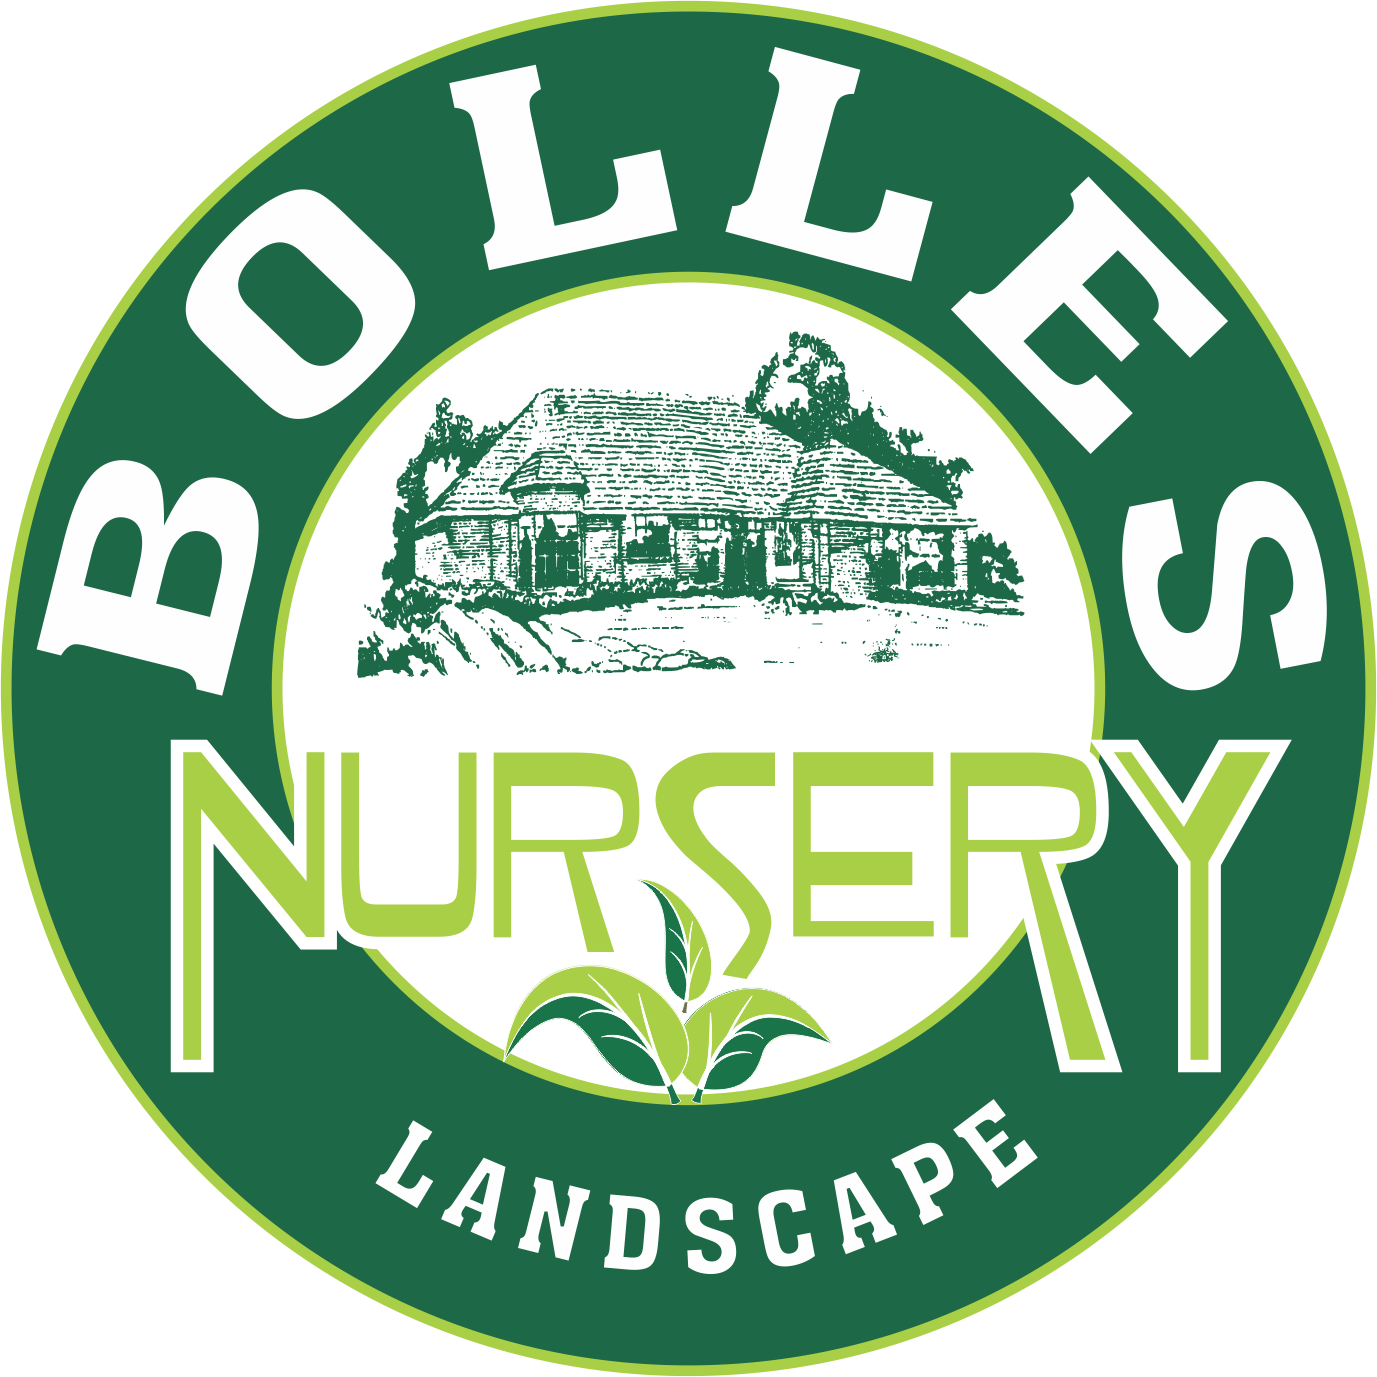 Materials for every landscaping project is available at Bolles Nursery